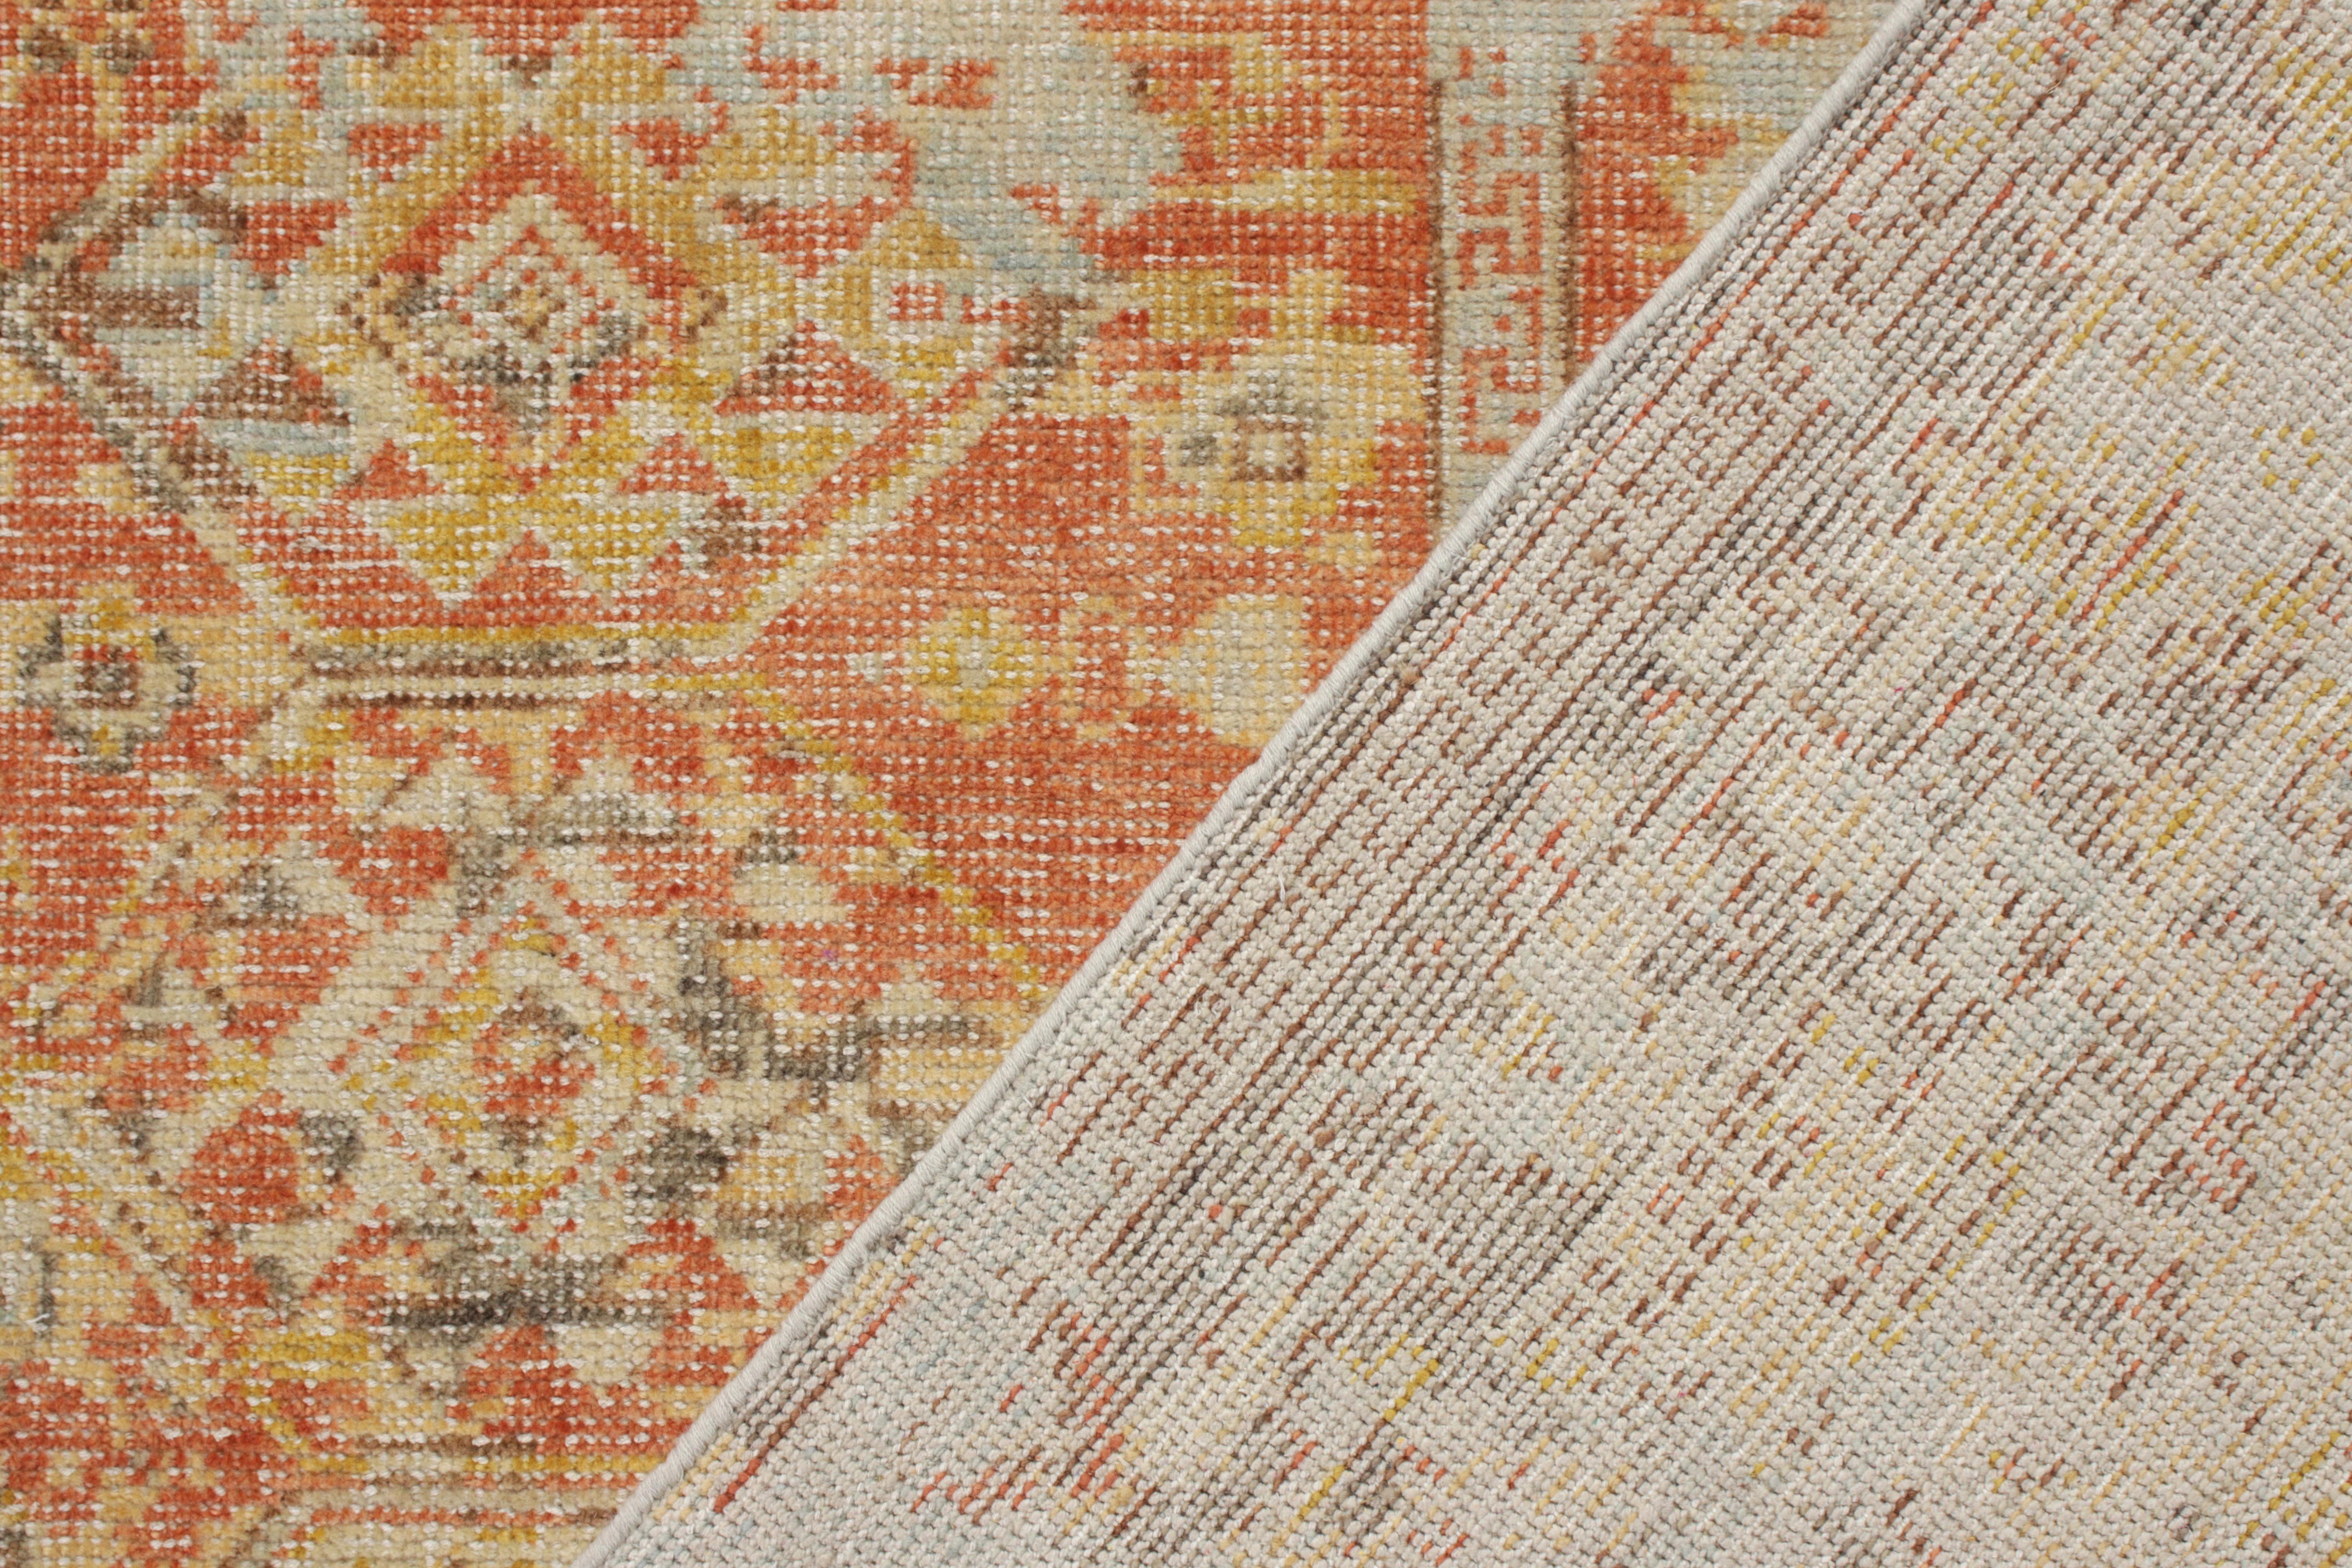 Hand-Knotted Rug & Kilim’s Distressed Style Custom Rug in Orange, Grey, Yellow Geometric For Sale